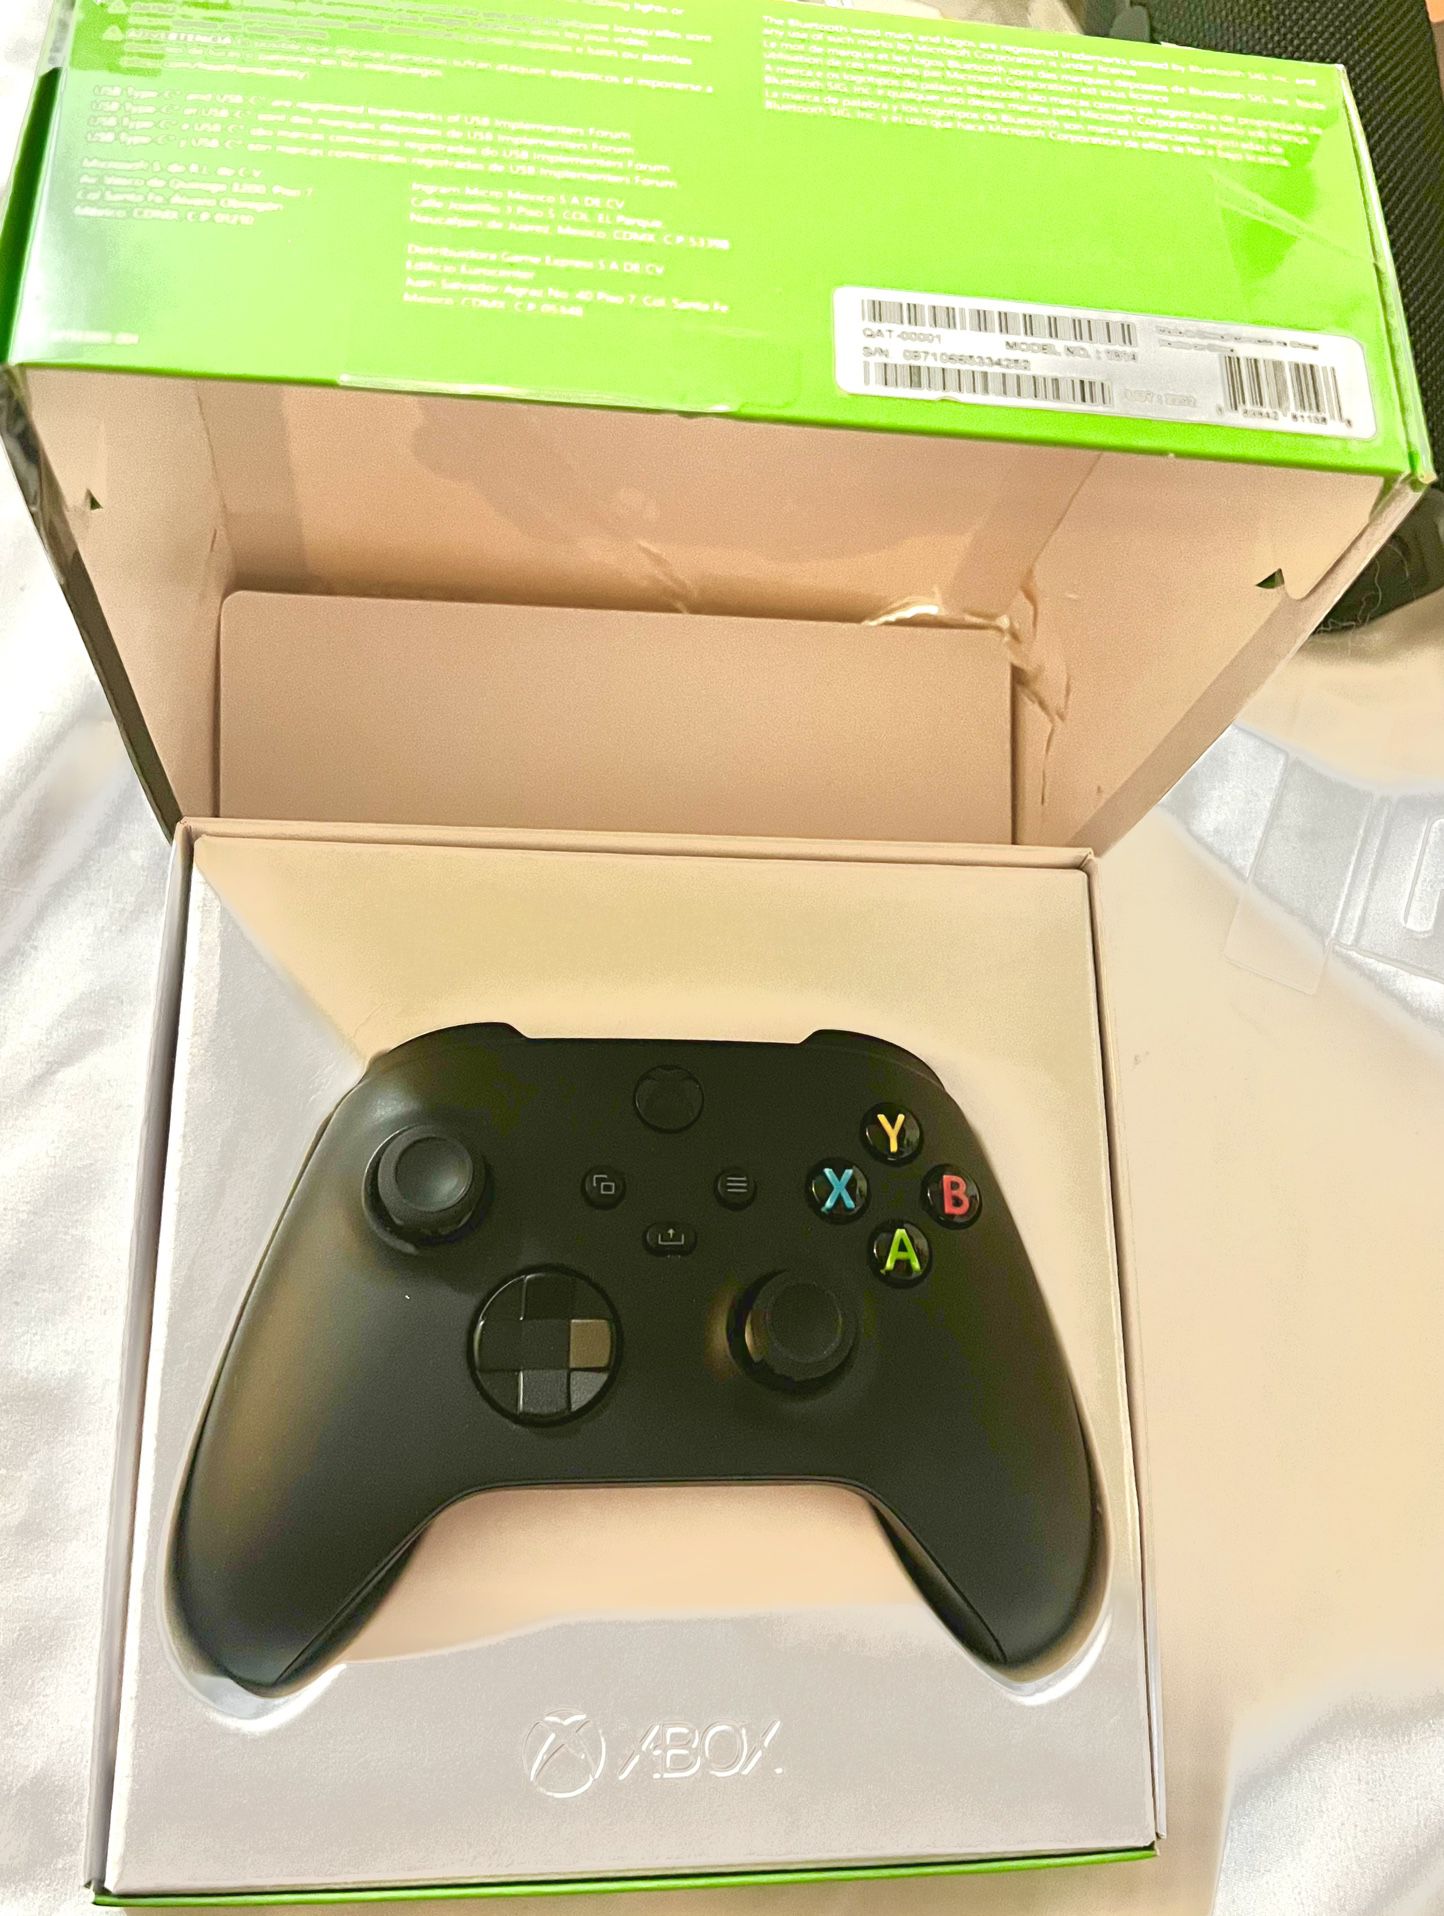 Xbox Microsoft  Core Wireless Gaming Controller – Carbon Black – Xbox Series X|S, Xbox One, Windows PC, Android, and iOS